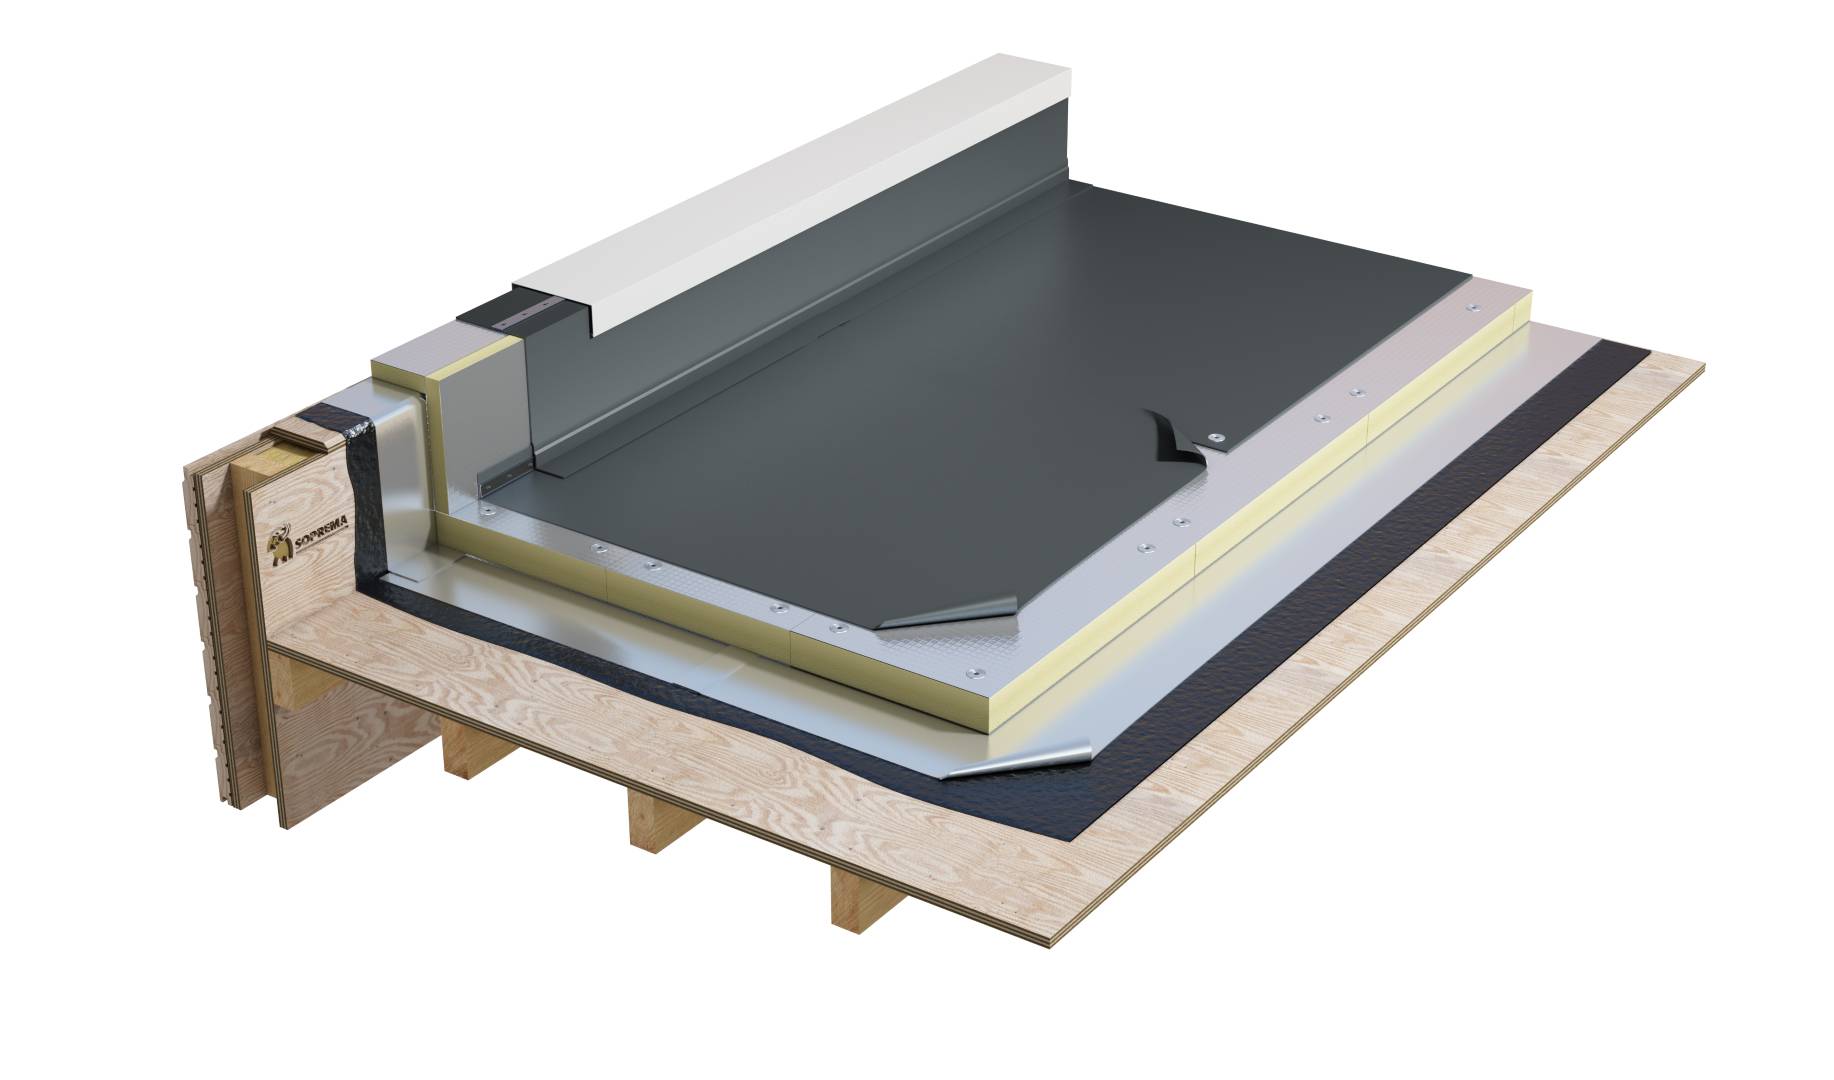 Flagon SR DE - Single ply mechanically fixed warm roof system